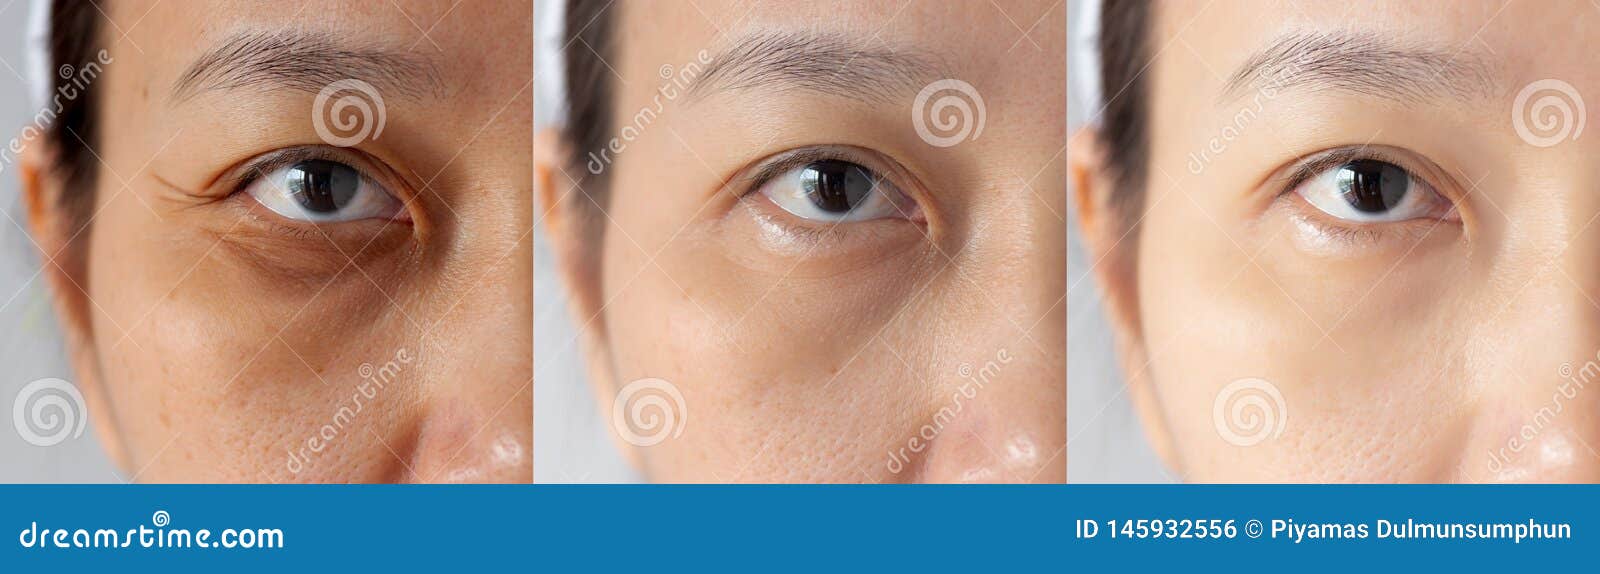 three pictures compared effect before and after treatment. under eyes with problems of dark circles ,puffiness and wrinkles